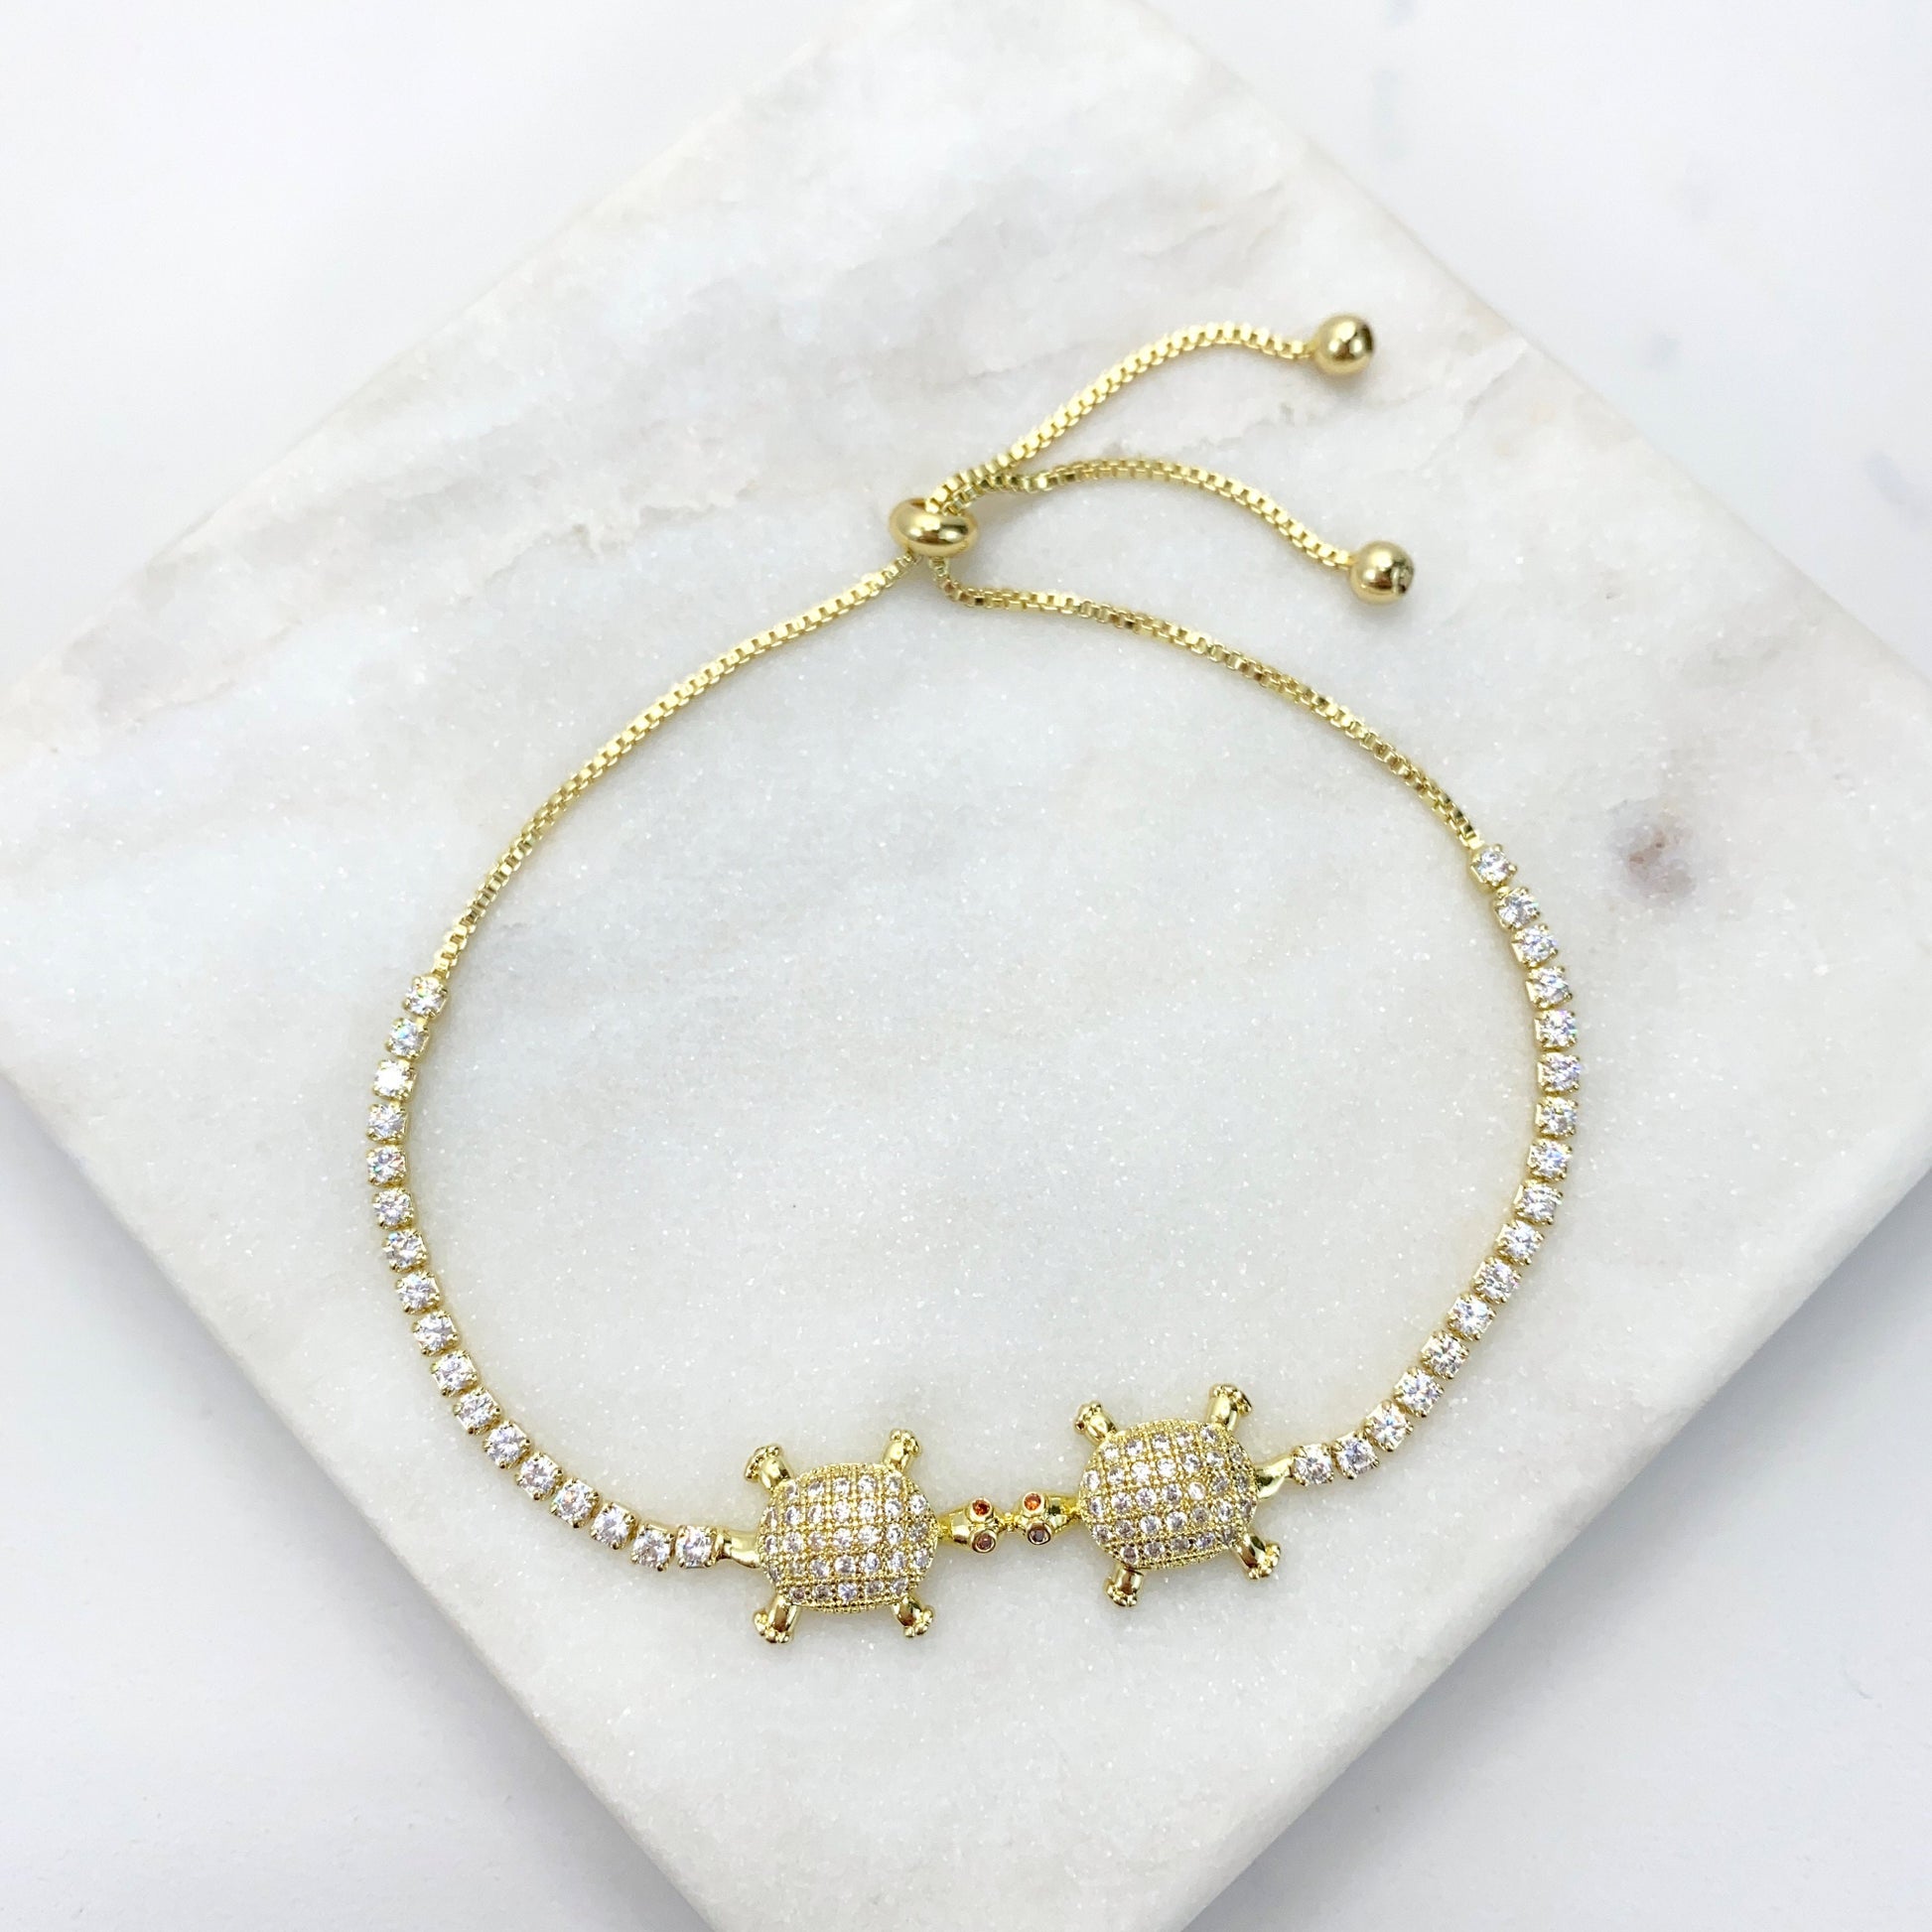 18k Gold Filled, 1mm Box Chain Cutie Petite Kissing Turtles, Gold, Rose Gold or Silver Adjustable Bracelet Wholesale Jewelry Supplies